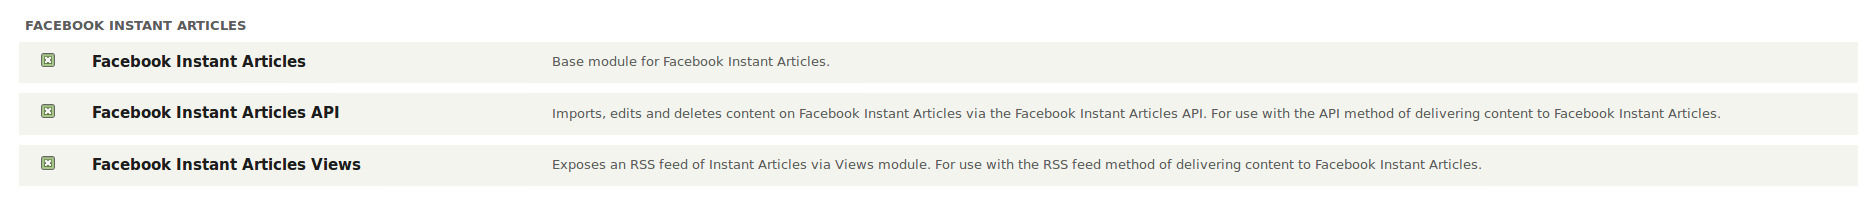 Activation of Facebook Instant Article module